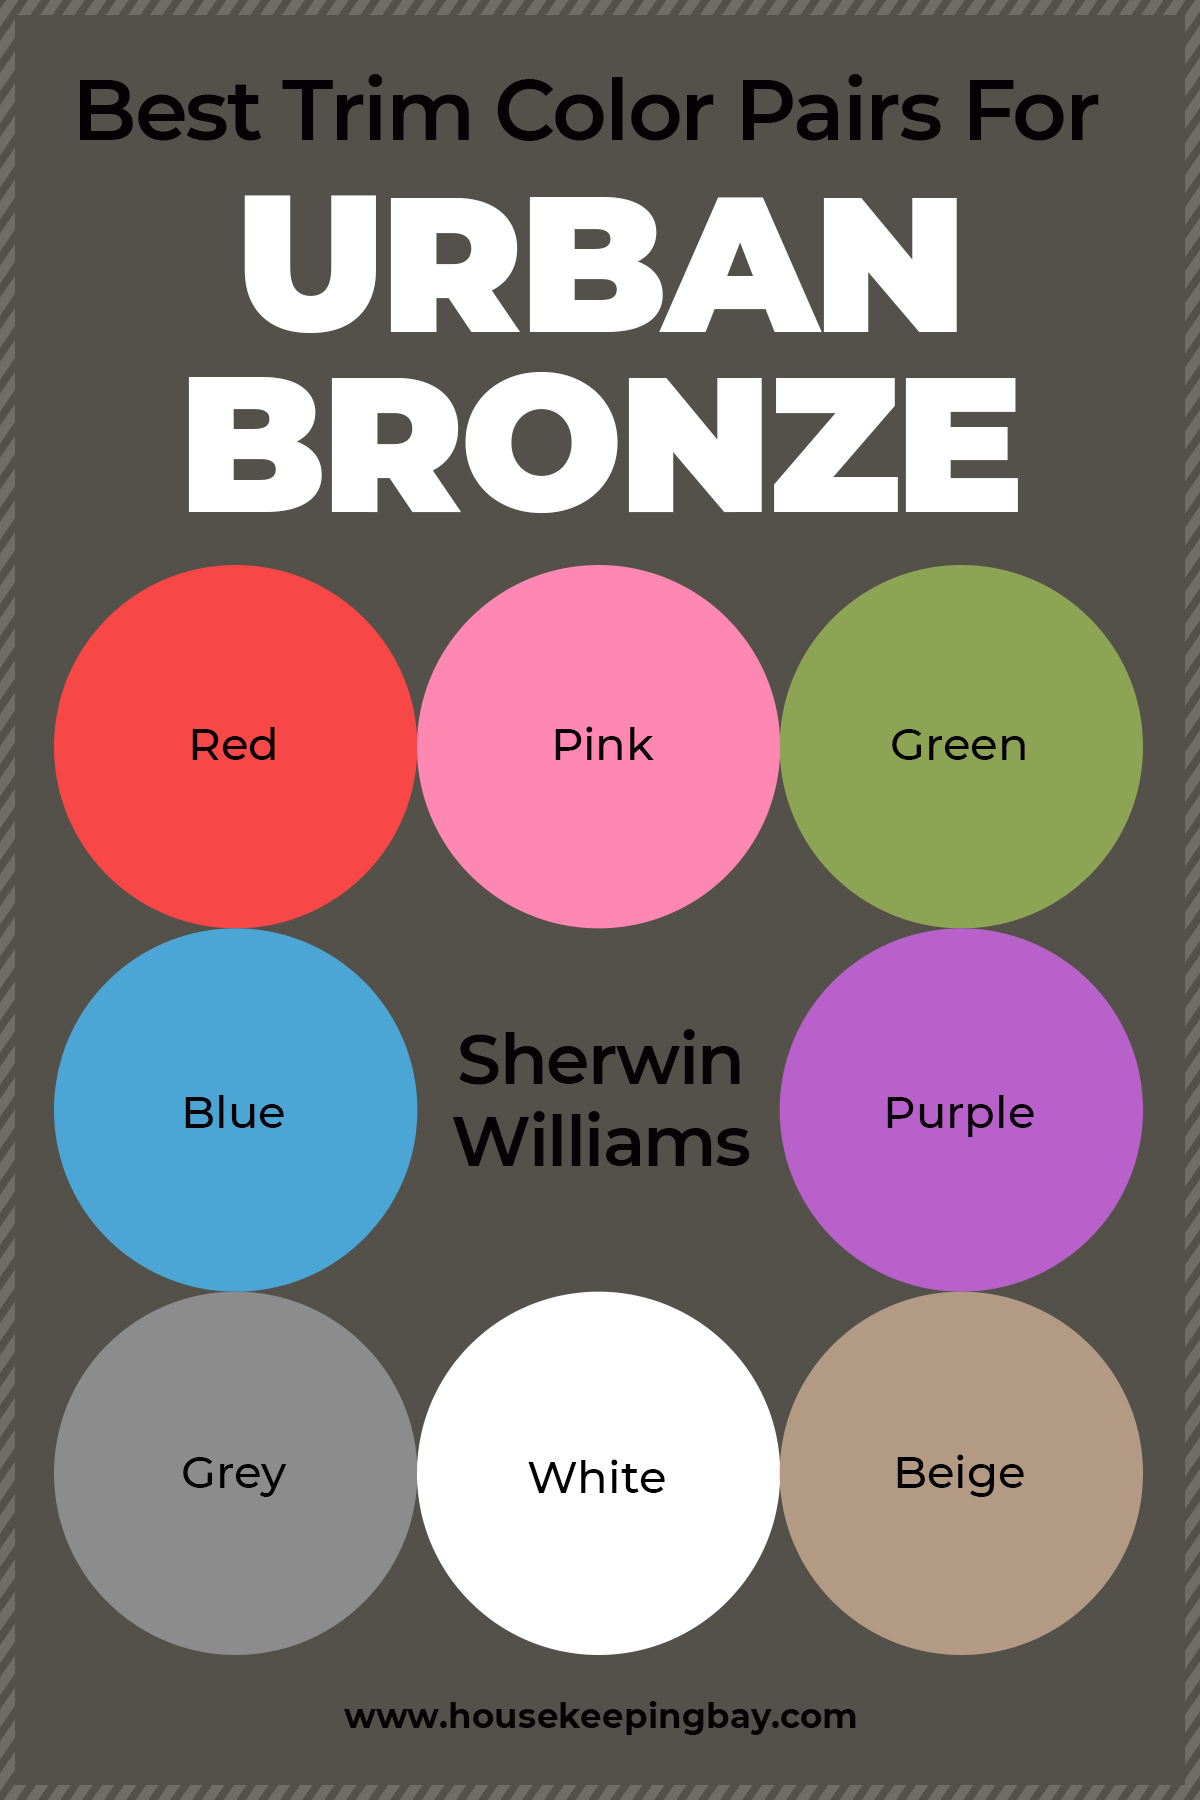 Best Trim Color Pairs For Urban Bronze by Sherwin Williams